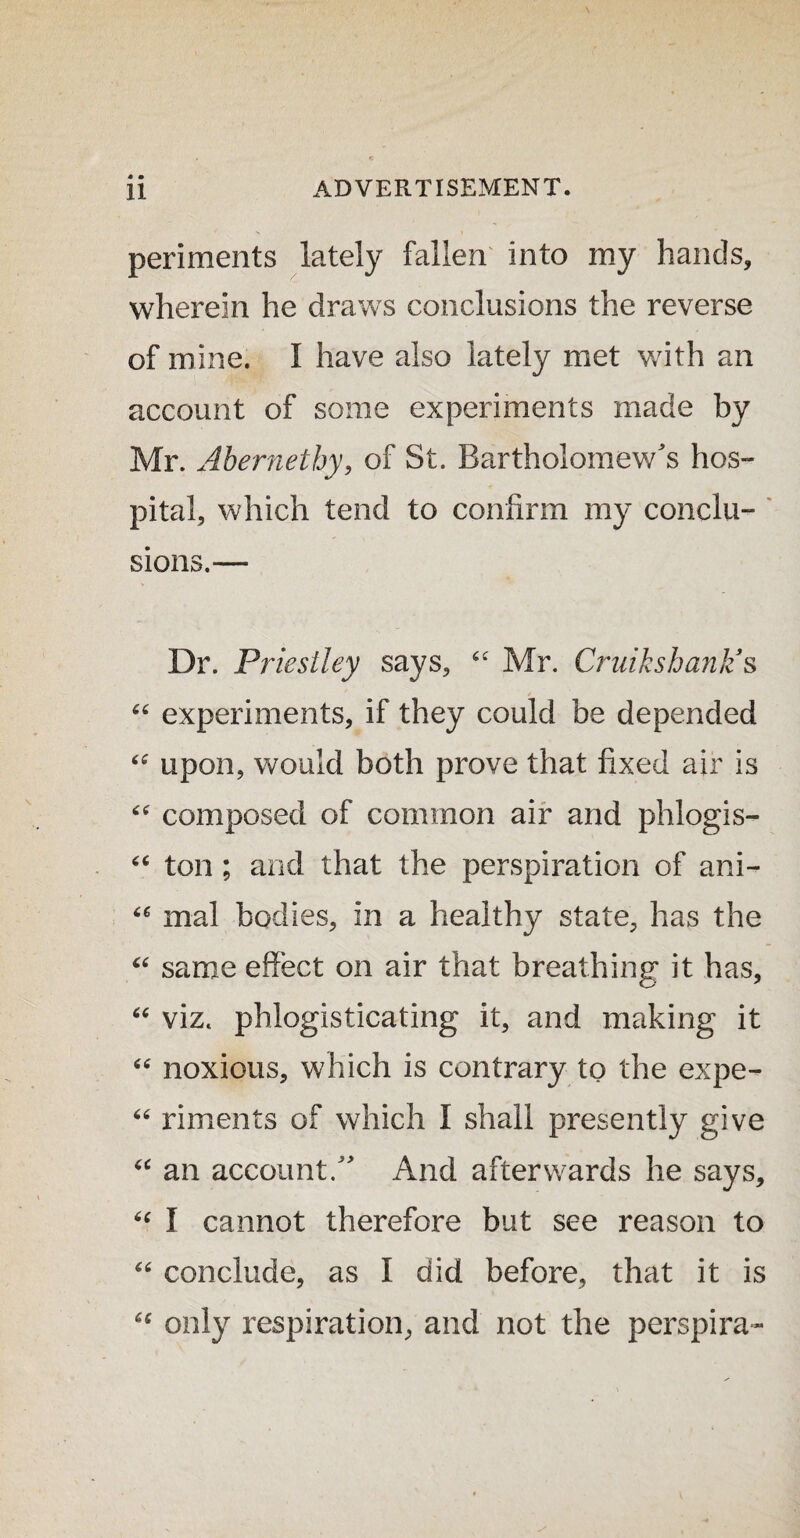 * • periments lately fallen Into my hands, wherein he draws conclusions the reverse of mine. I have also lately met with an account of some experiments made by Mr. Abernethy, of St. Bartholomew's hos¬ pital, which tend to confirm my conclu¬ sions.— Dr. Priestley says, 44 Mr. Cruikshanlz s 44 experiments, if they could be depended 44 upon, would both prove that fixed air is 44 composed of common air and phlogis- 44 ton ; and that the perspiration of ani- 44 mal bodies, in a healthy state, has the 44 same effect on air that breathing it has, 44 viz. phlogisticating it, and making it 46 noxious, which is contrary to the expe- 44 riments of which I shall presently give 44 an account. And afterwards he says, 44 I cannot therefore but see reason to 44 conclude, as I did before, that it is 44 only respiration, and not the perspira-